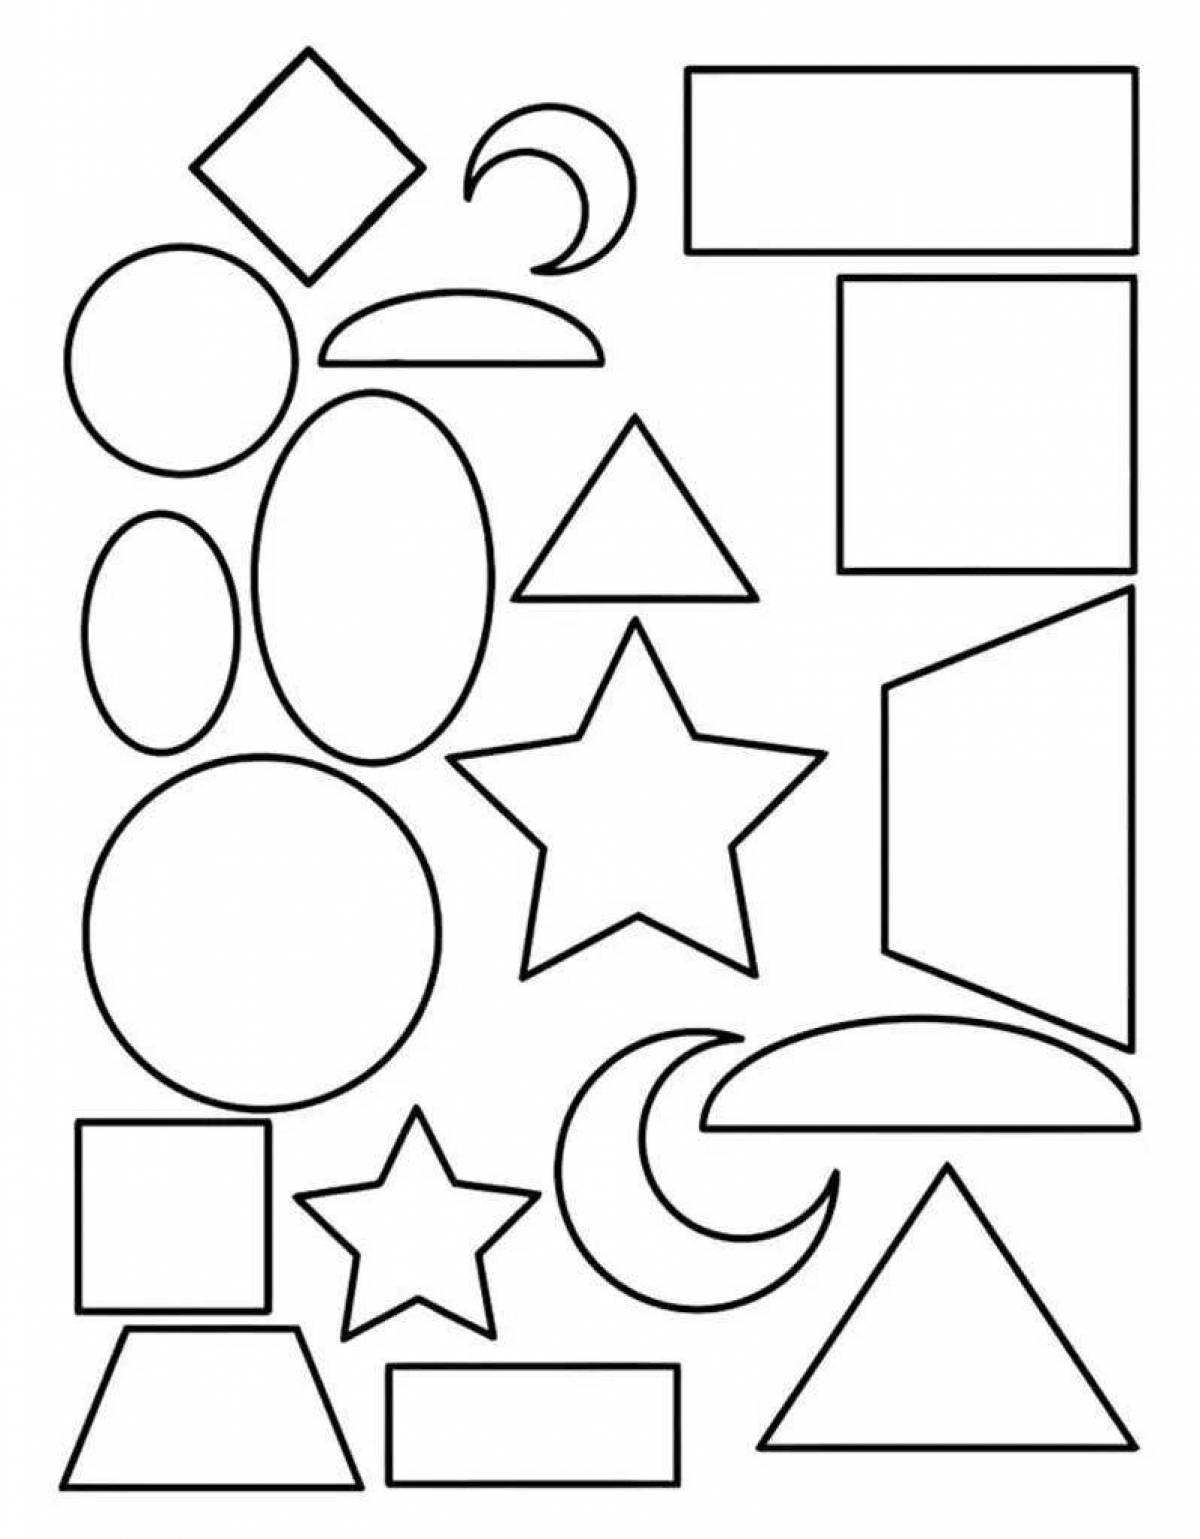 Coloring page for bold geometric shapes